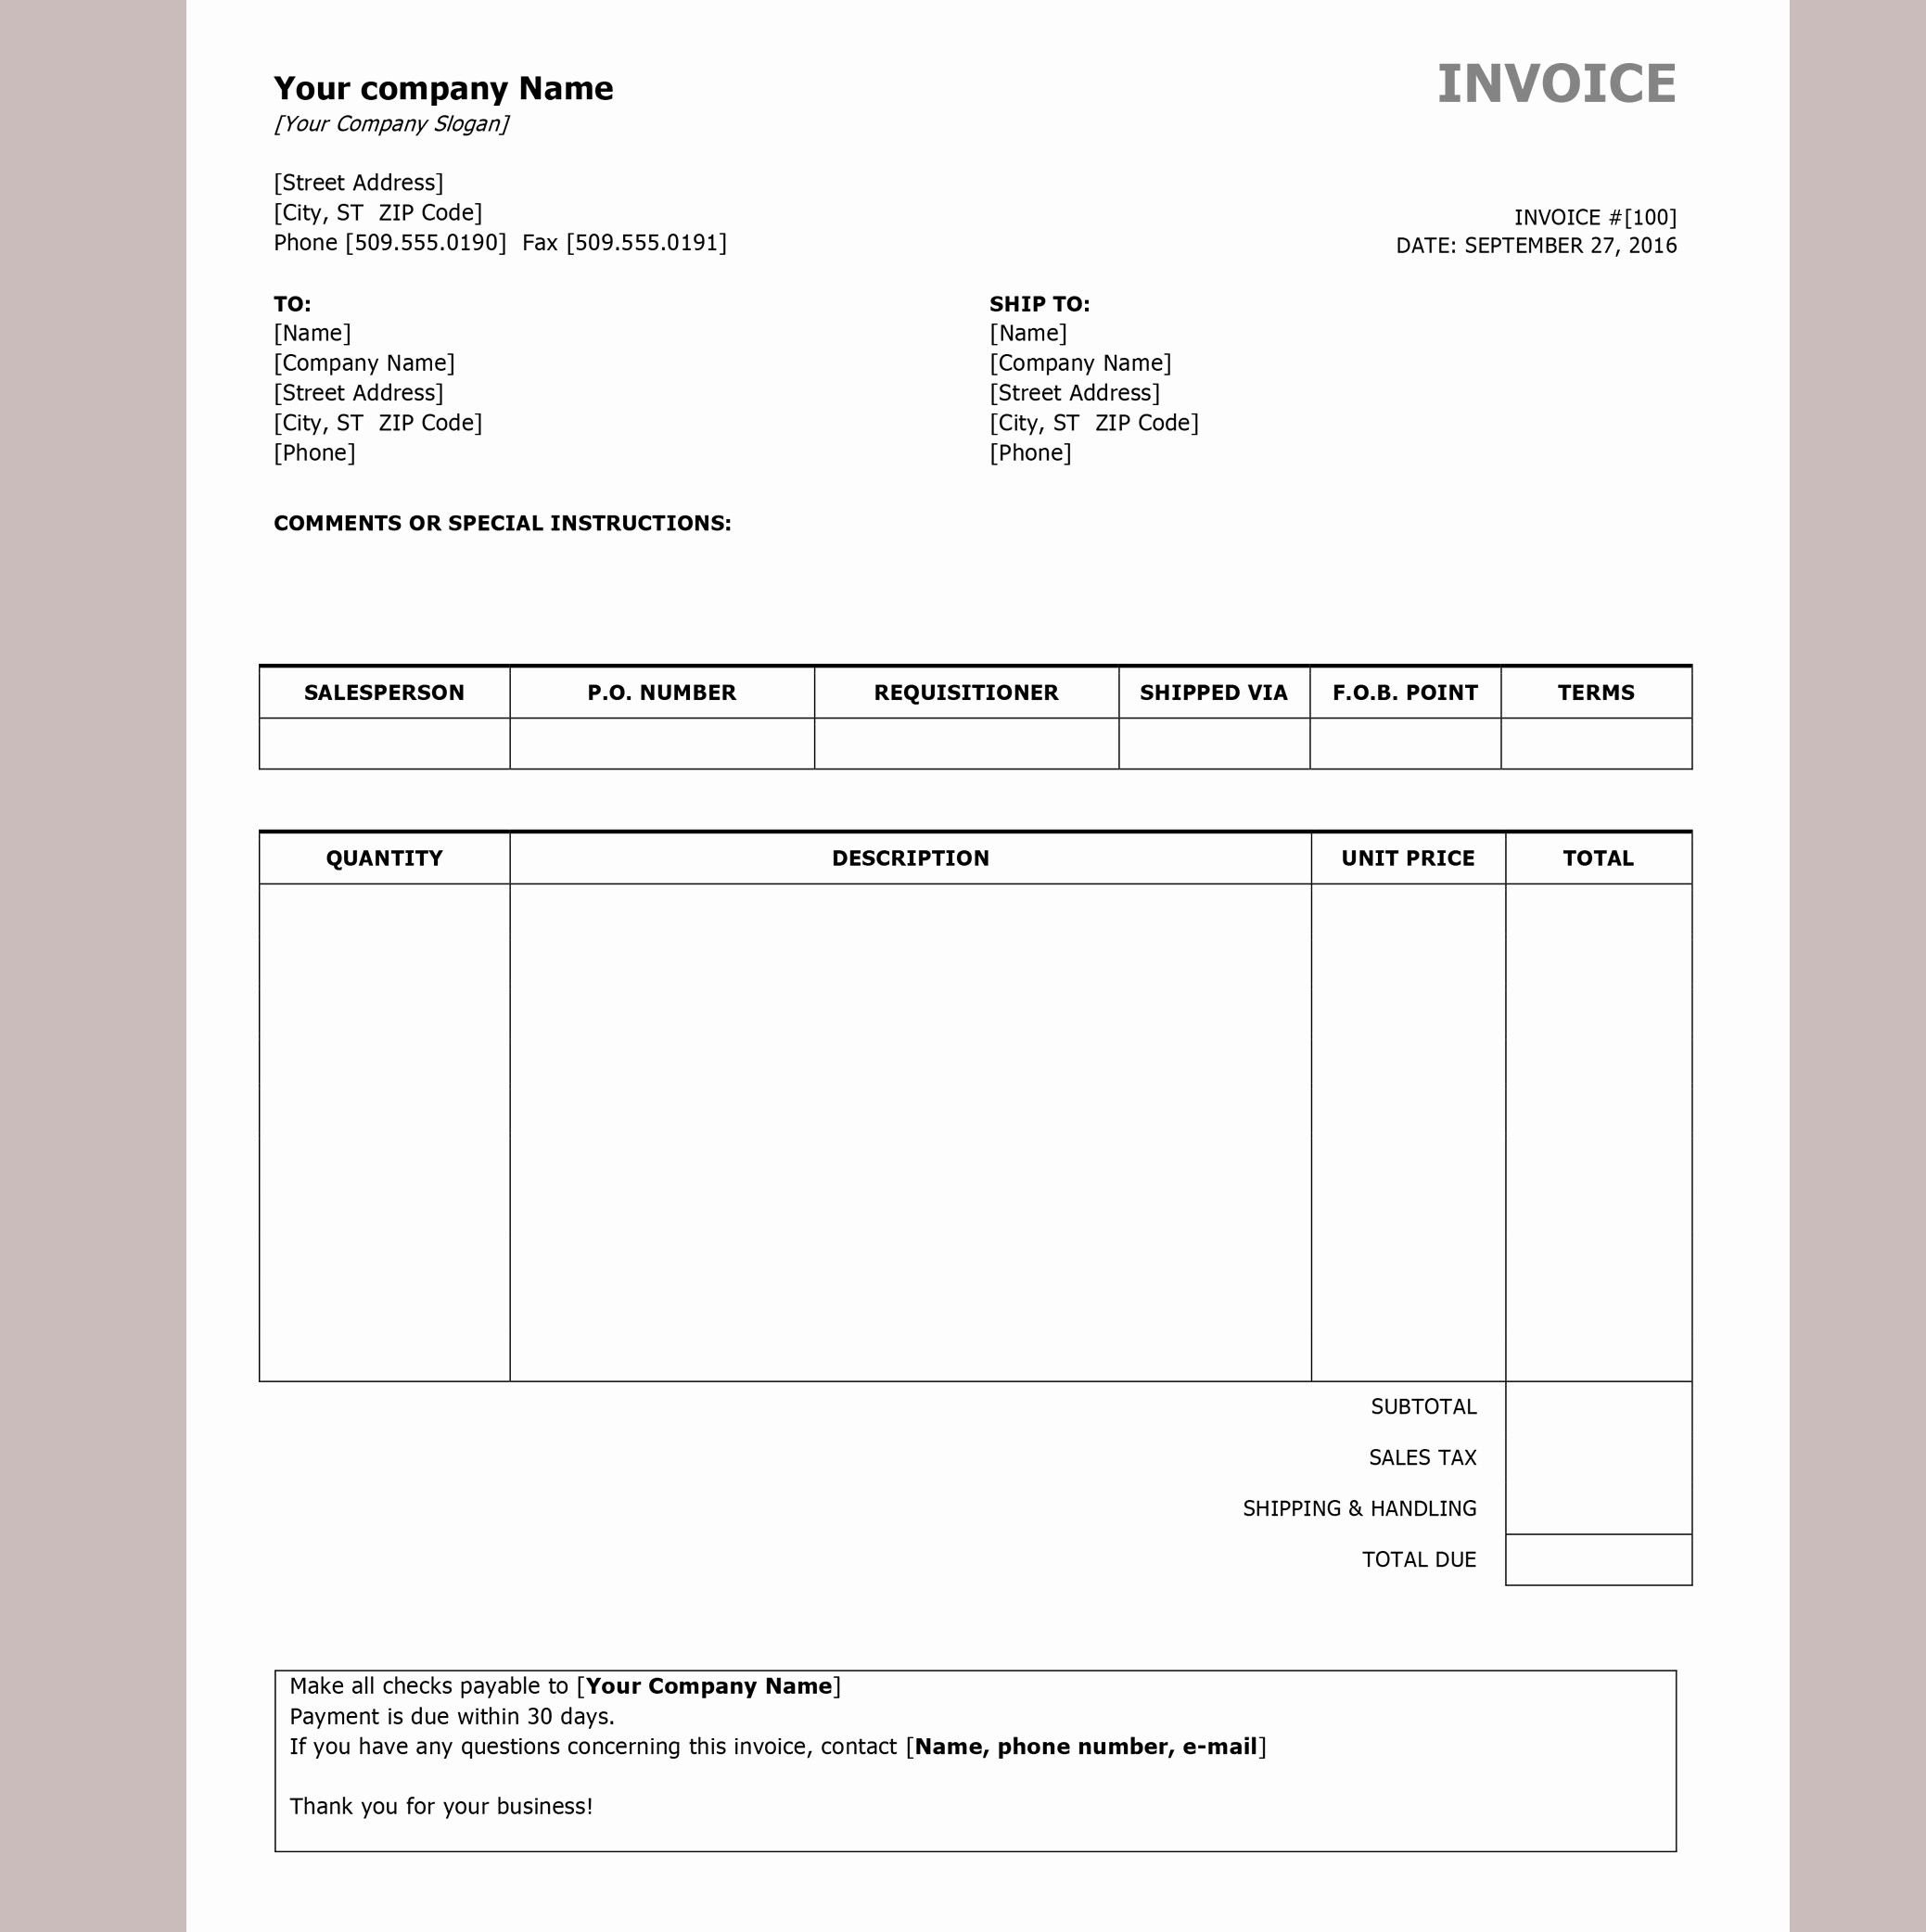 Free Invoice format In Word Inspirational Free Invoice Templates by Invoiceberry the Grid System